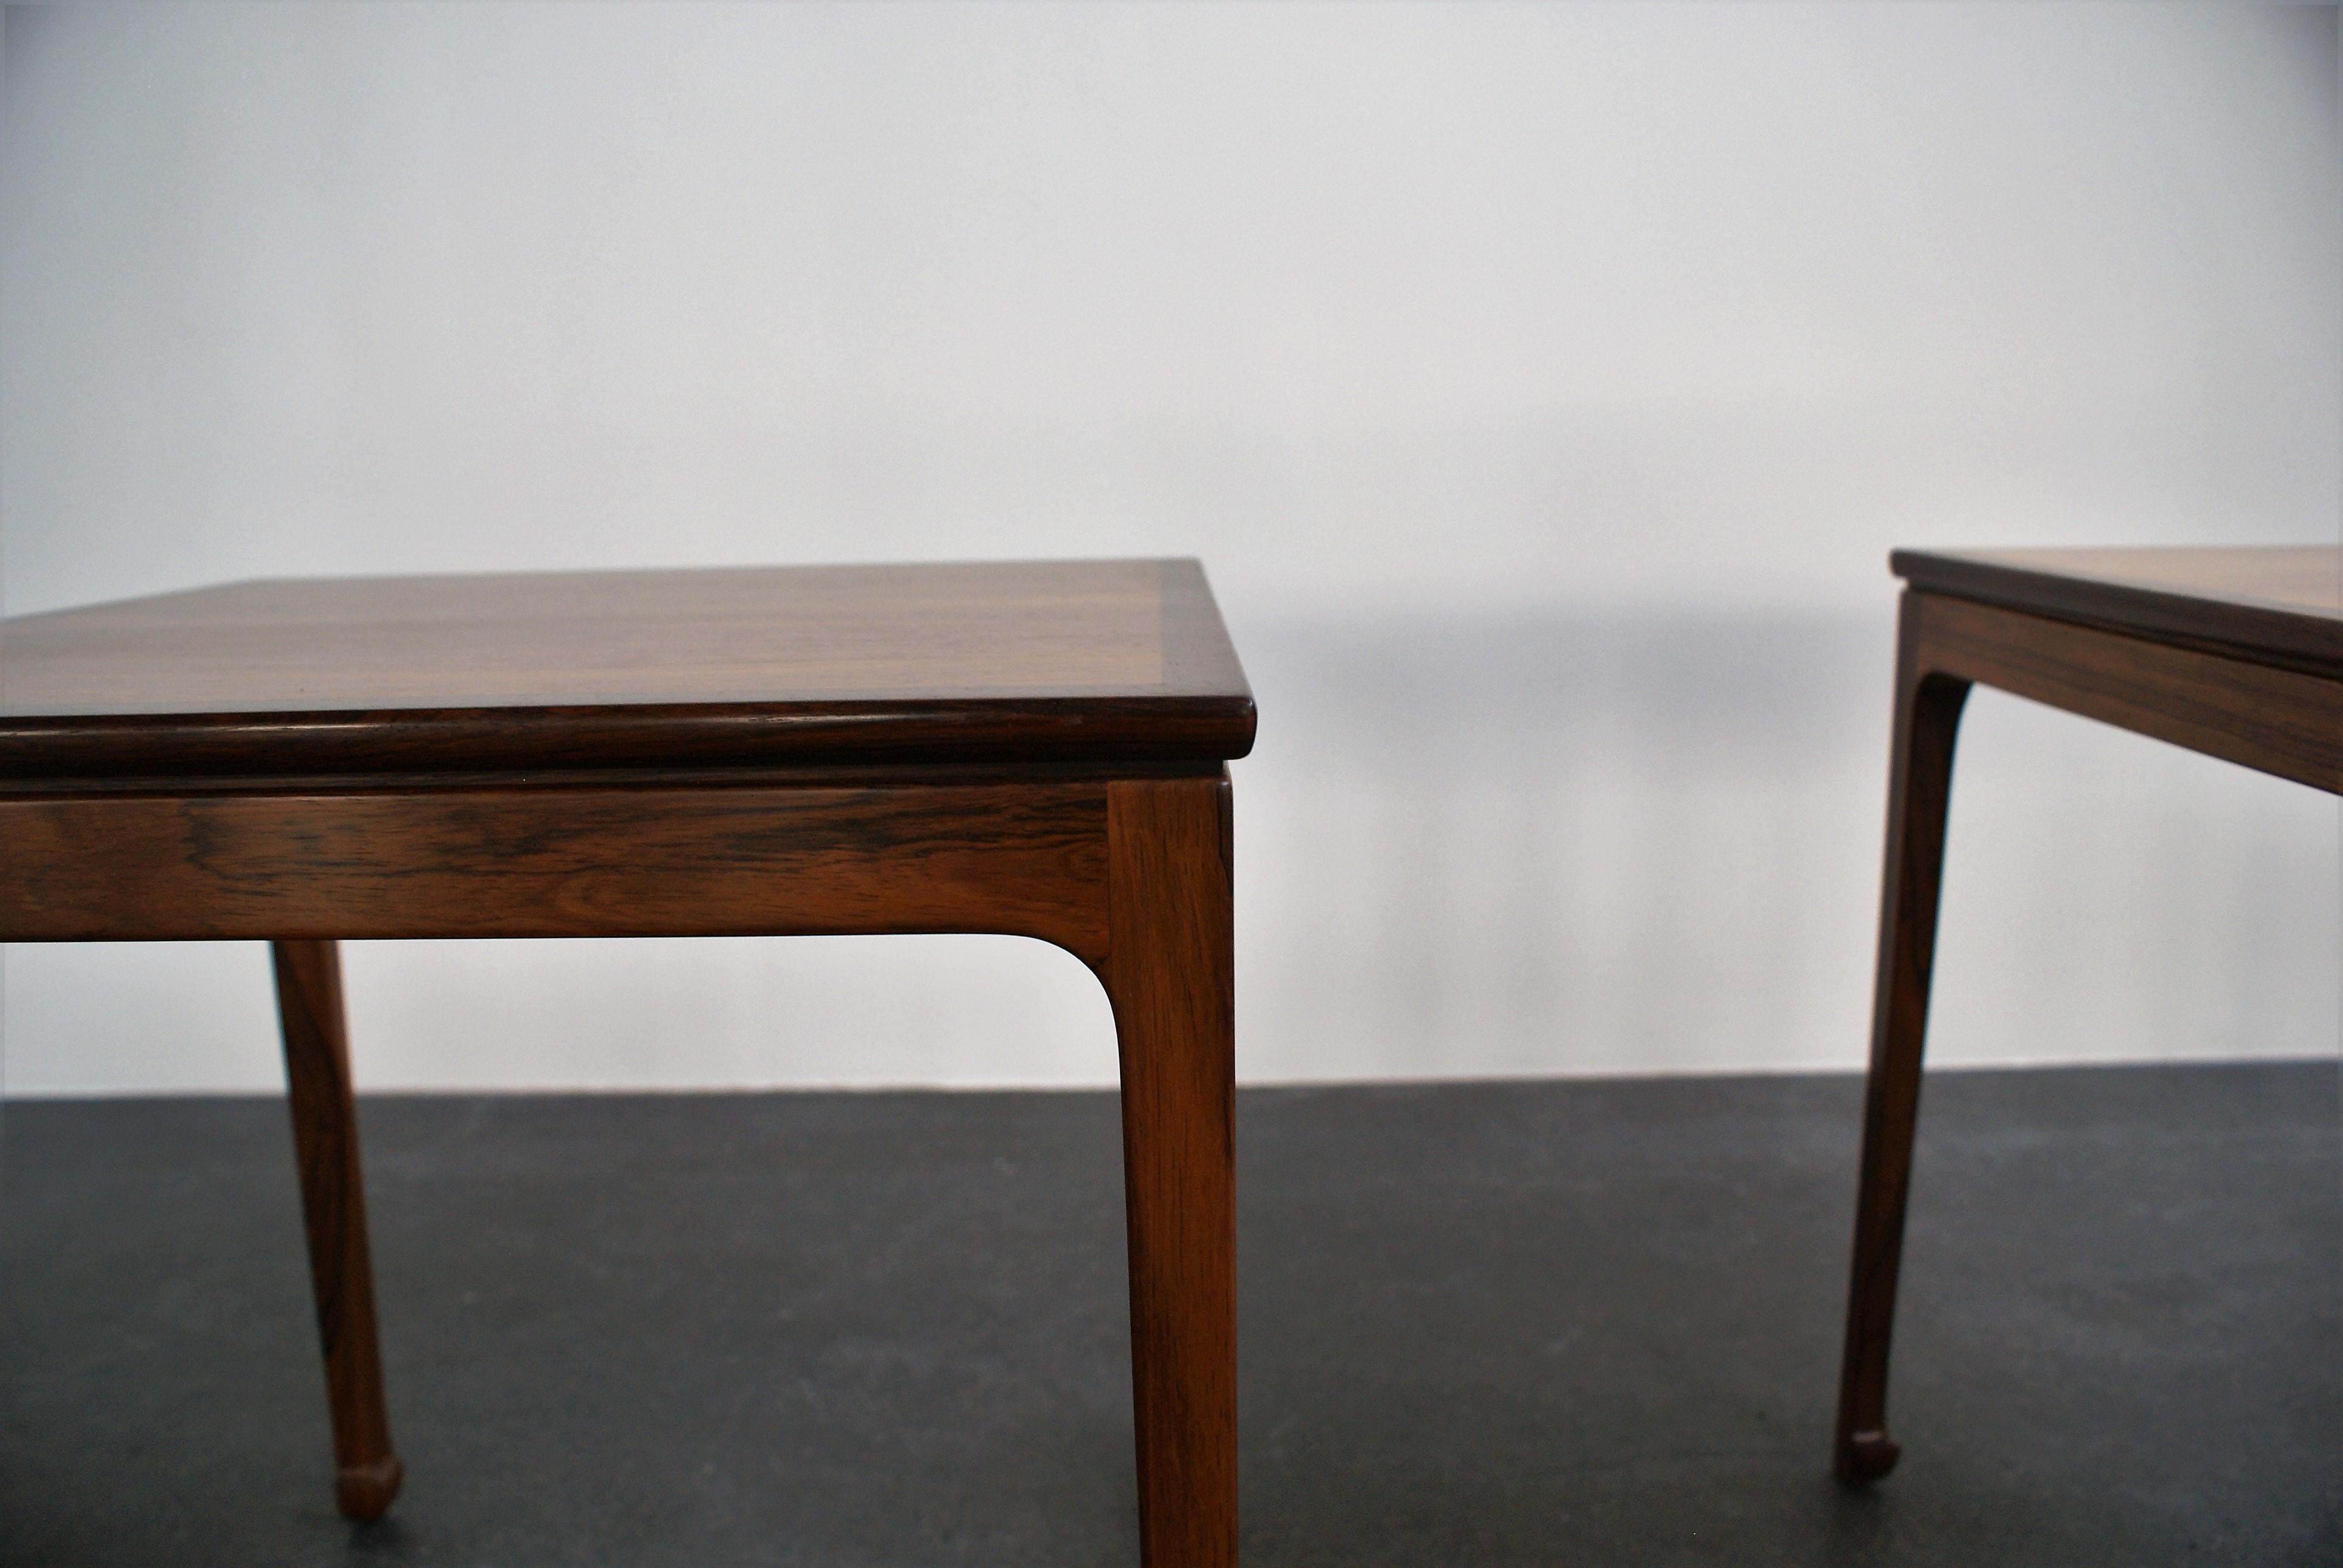 Ole Wanscher Pair of Side Tables in Brazilian Rosewood for A. J. Iversen, 1957 For Sale 2